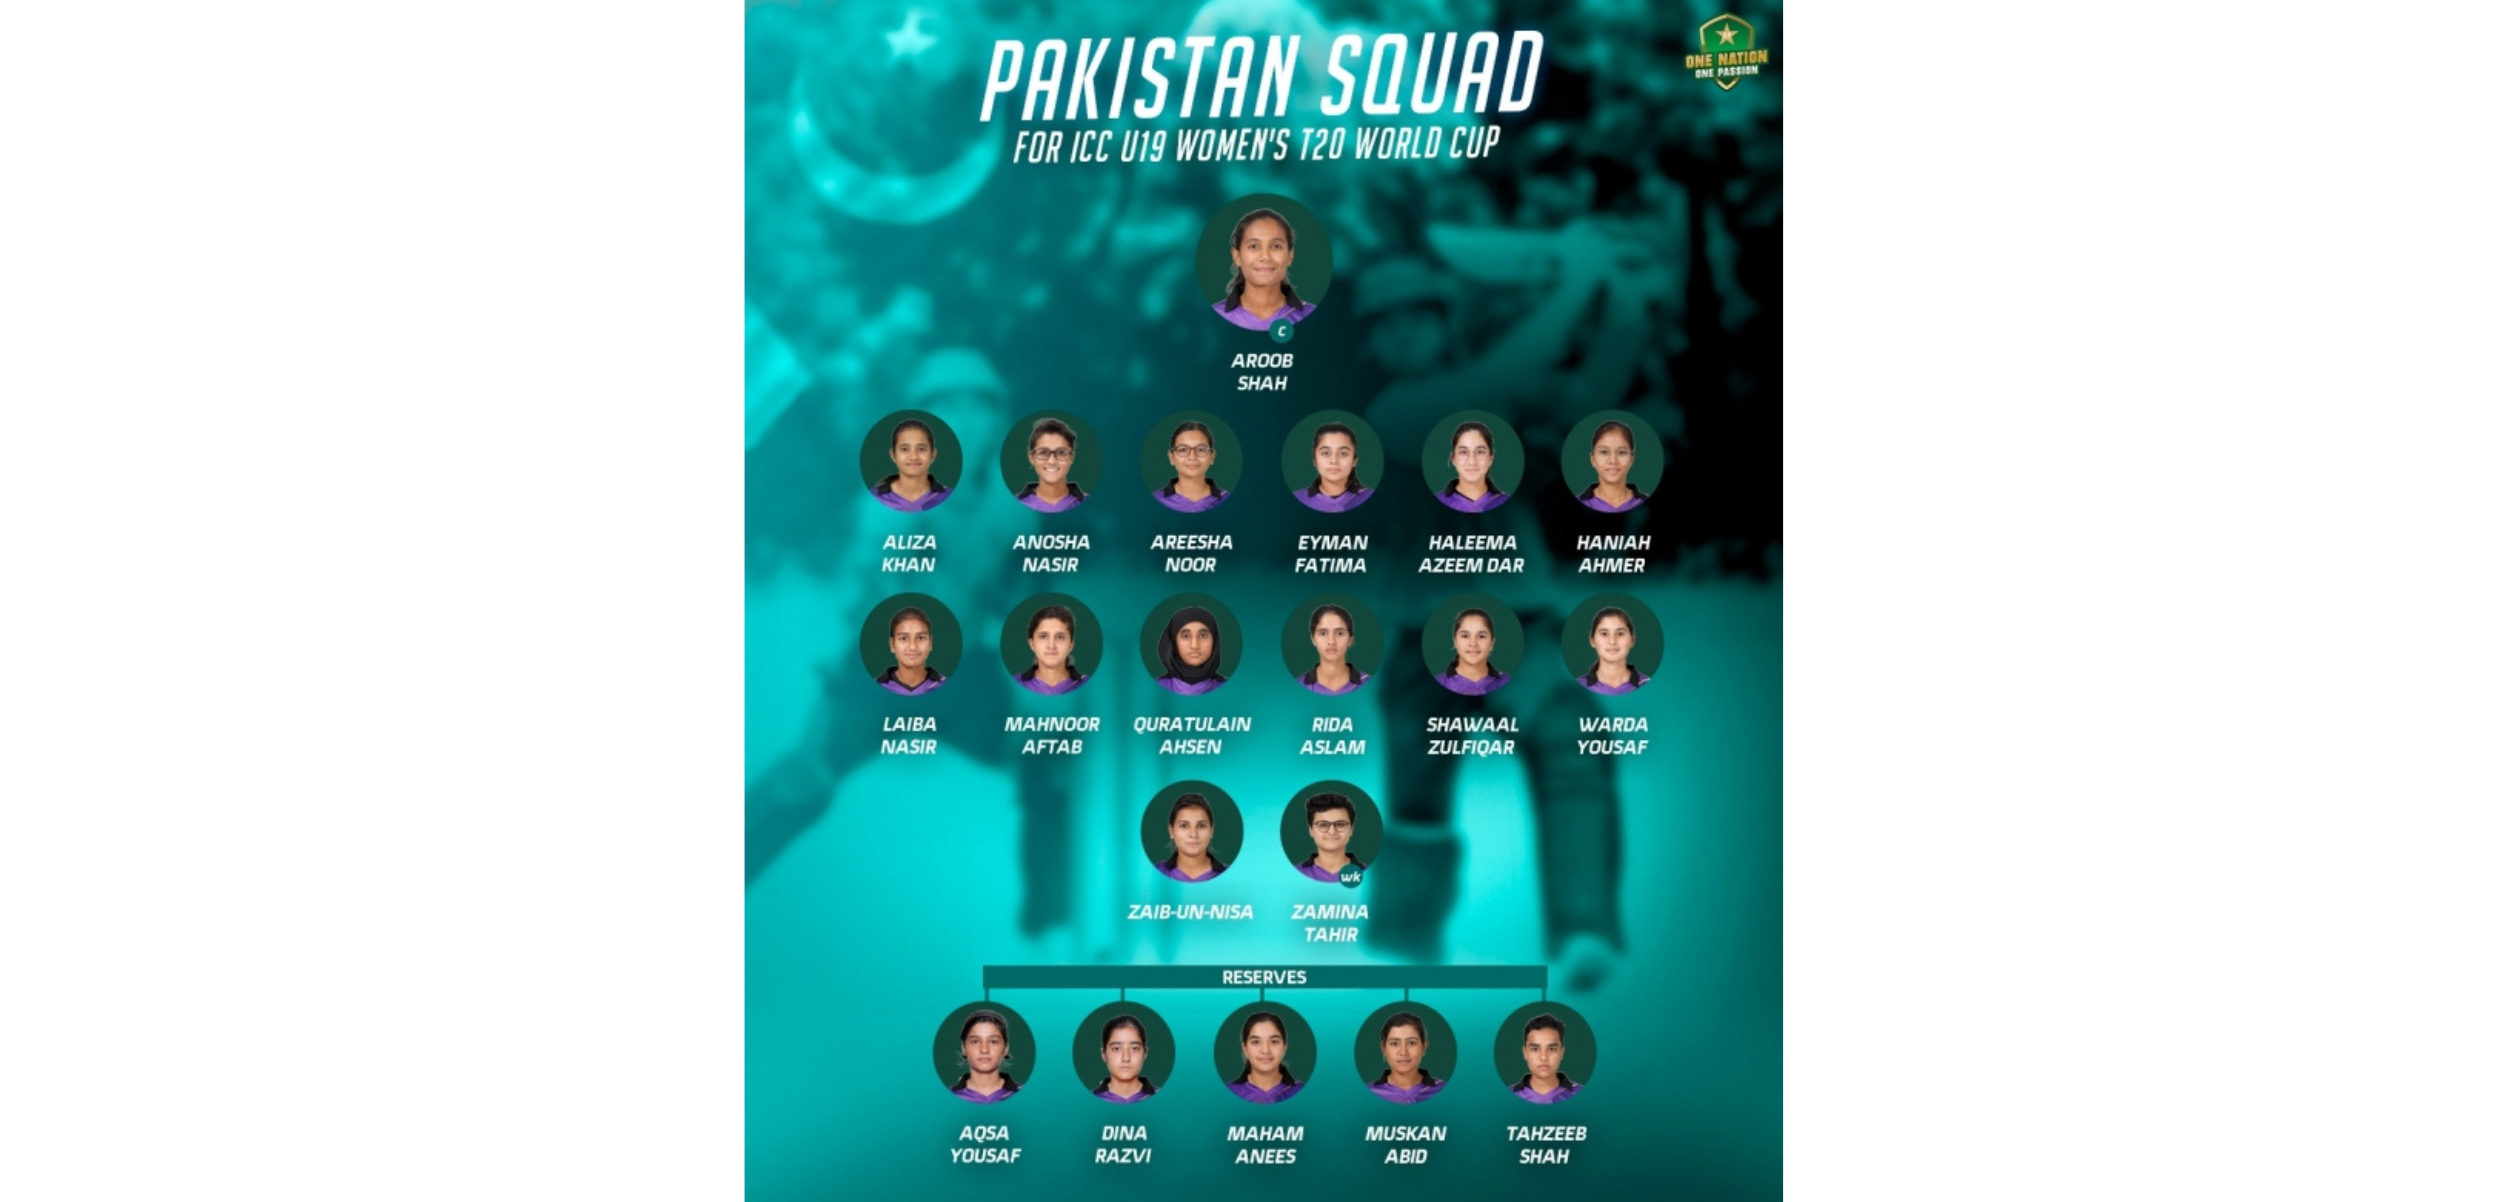 PCB: Aroob Shah to lead Pakistan in ICC U19 Women's T20 World Cup